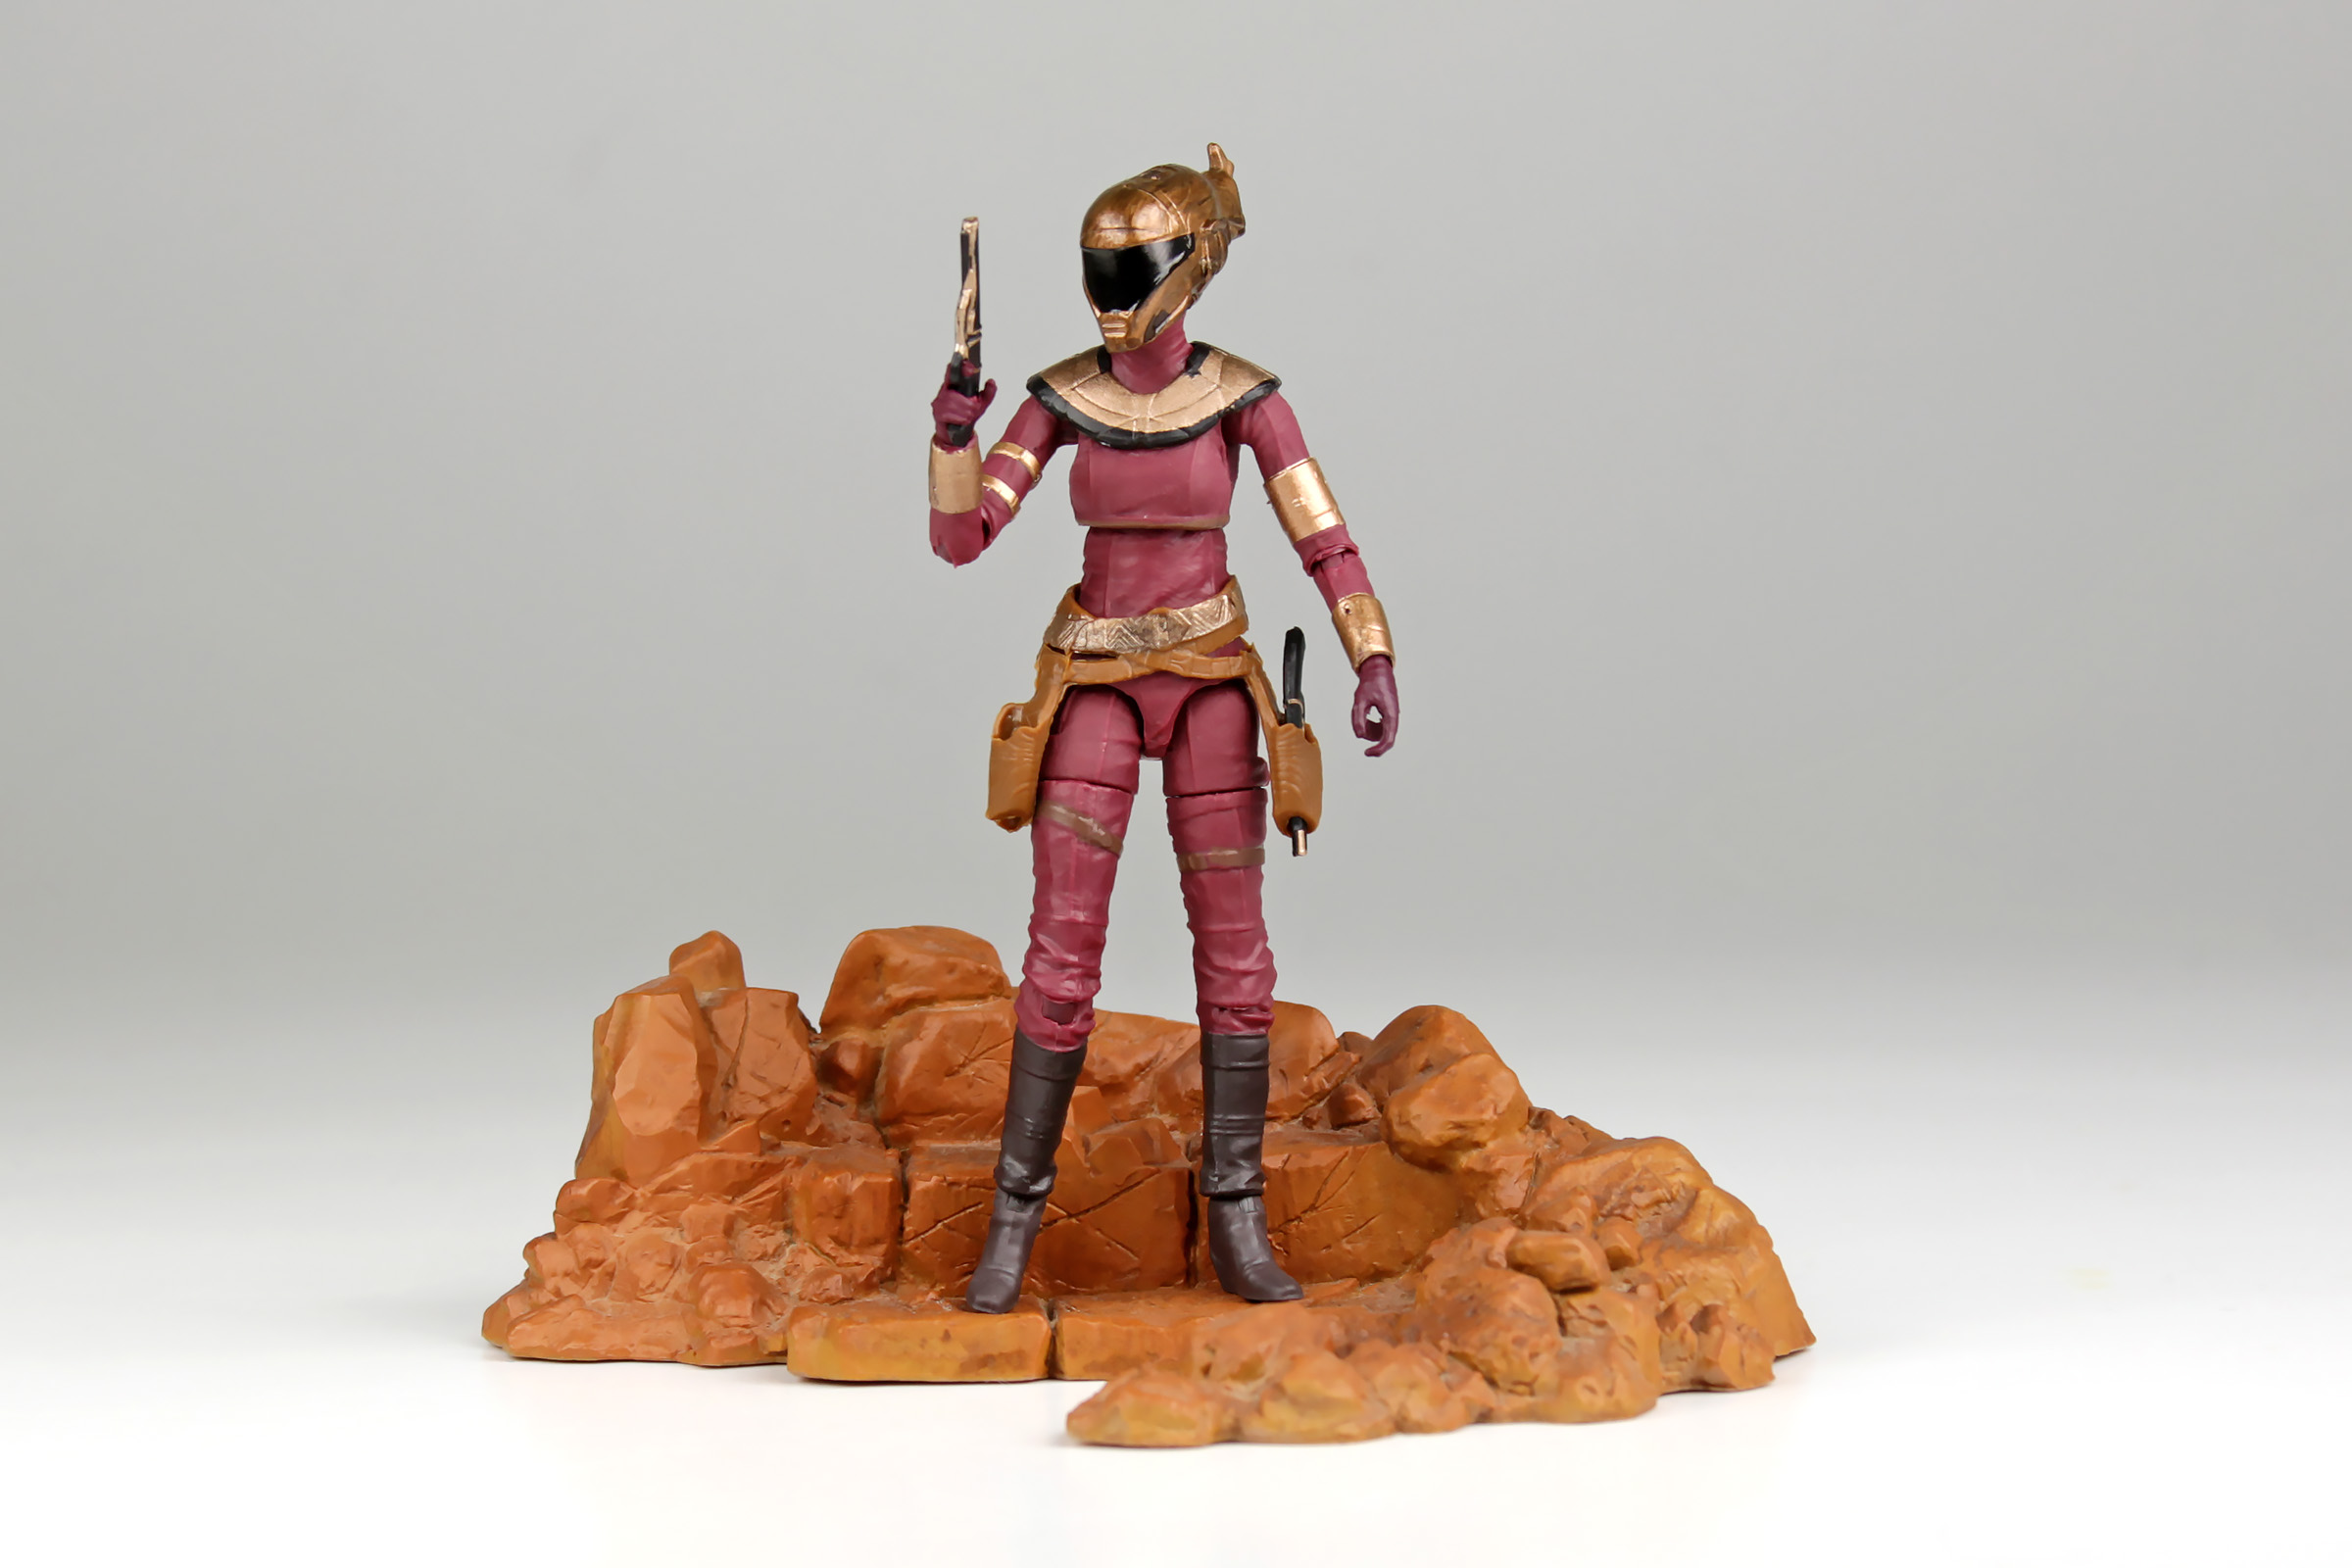 The Vintage Collection Zorii Bliss figure